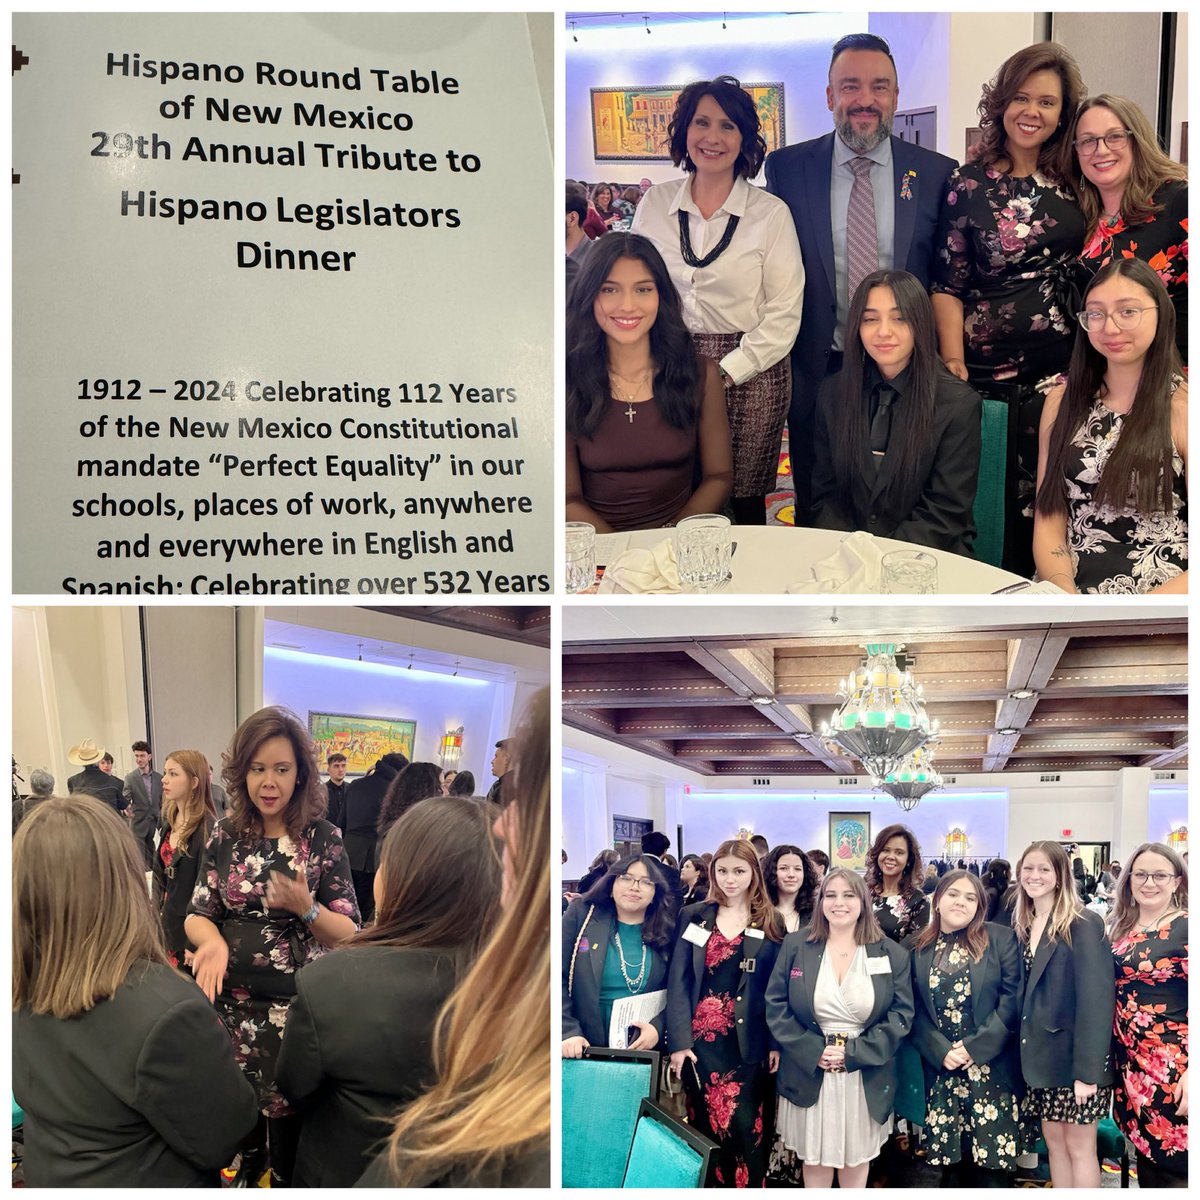 Had such a great time hearing from #ENLACENM students at the Hispano Round Table of New Mexico 29th Annual Tribute to Hispano Legislators Dinner. So amazing to hear our students talking about their experience in being exposed to #leadership opportunities and developing #Advocacy